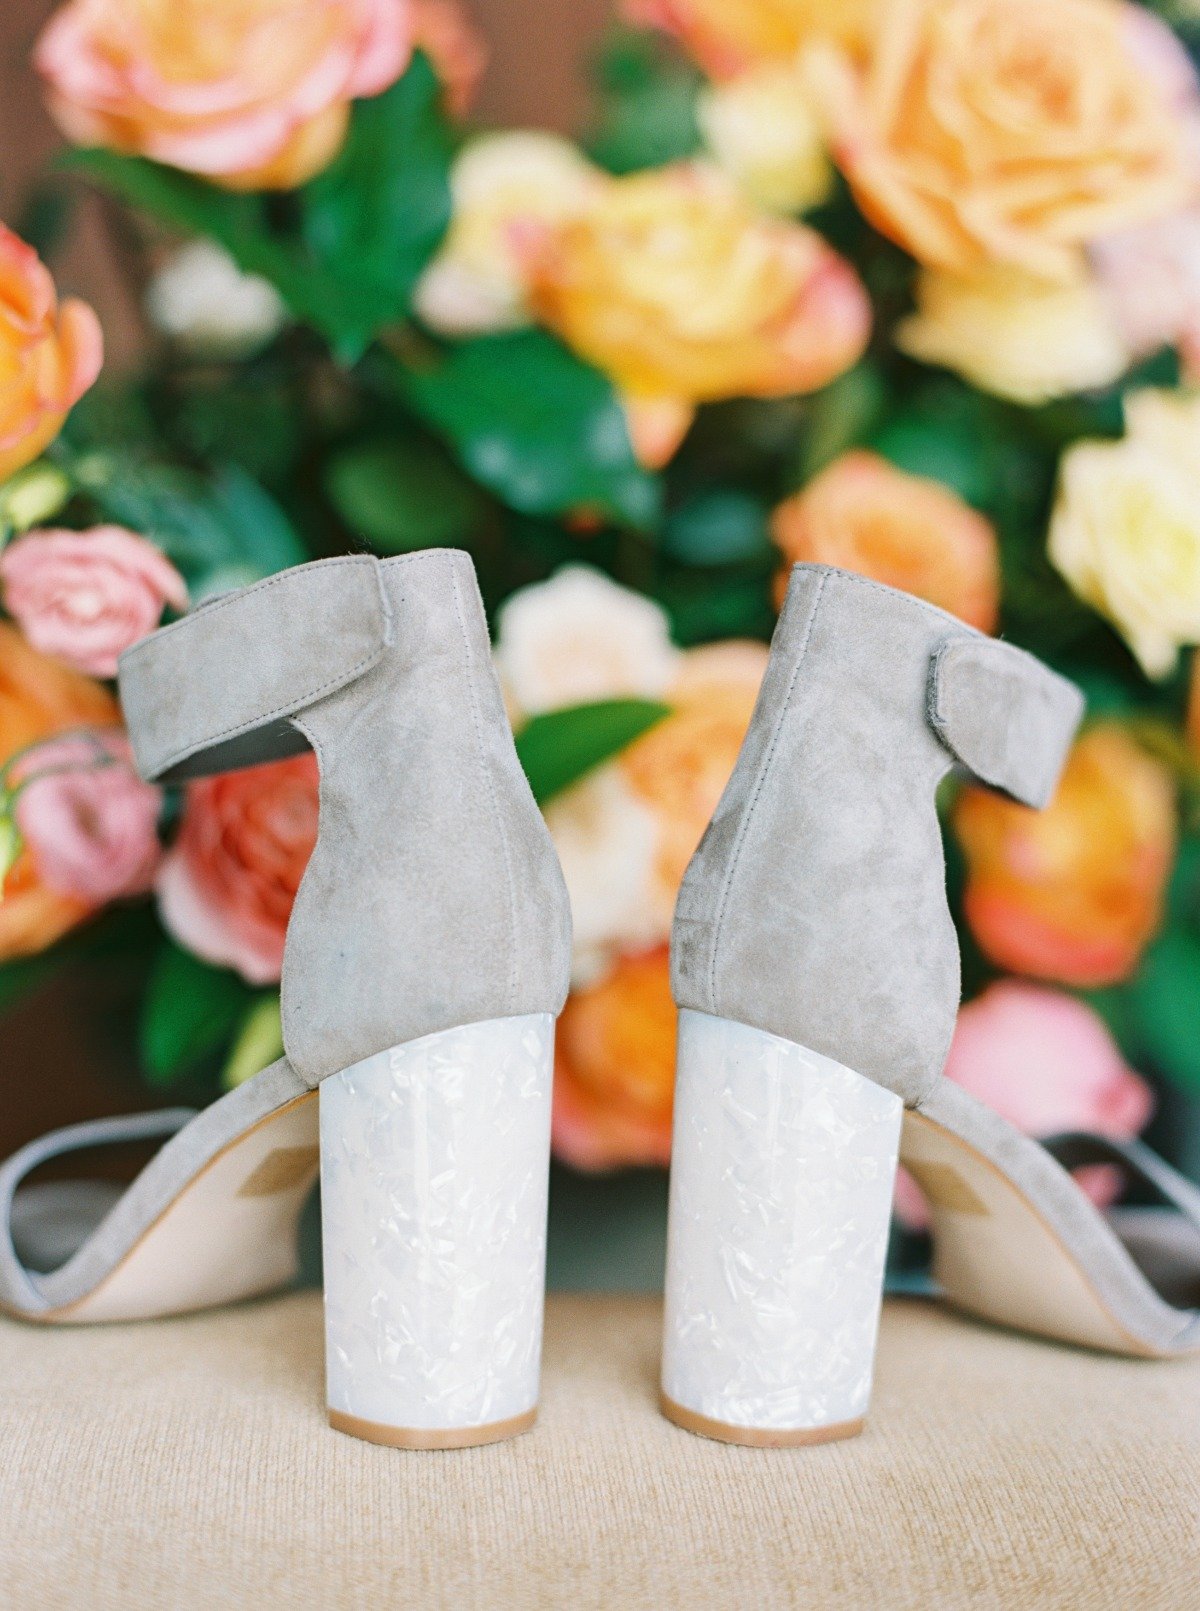 gray wedding shoes with lucite heels